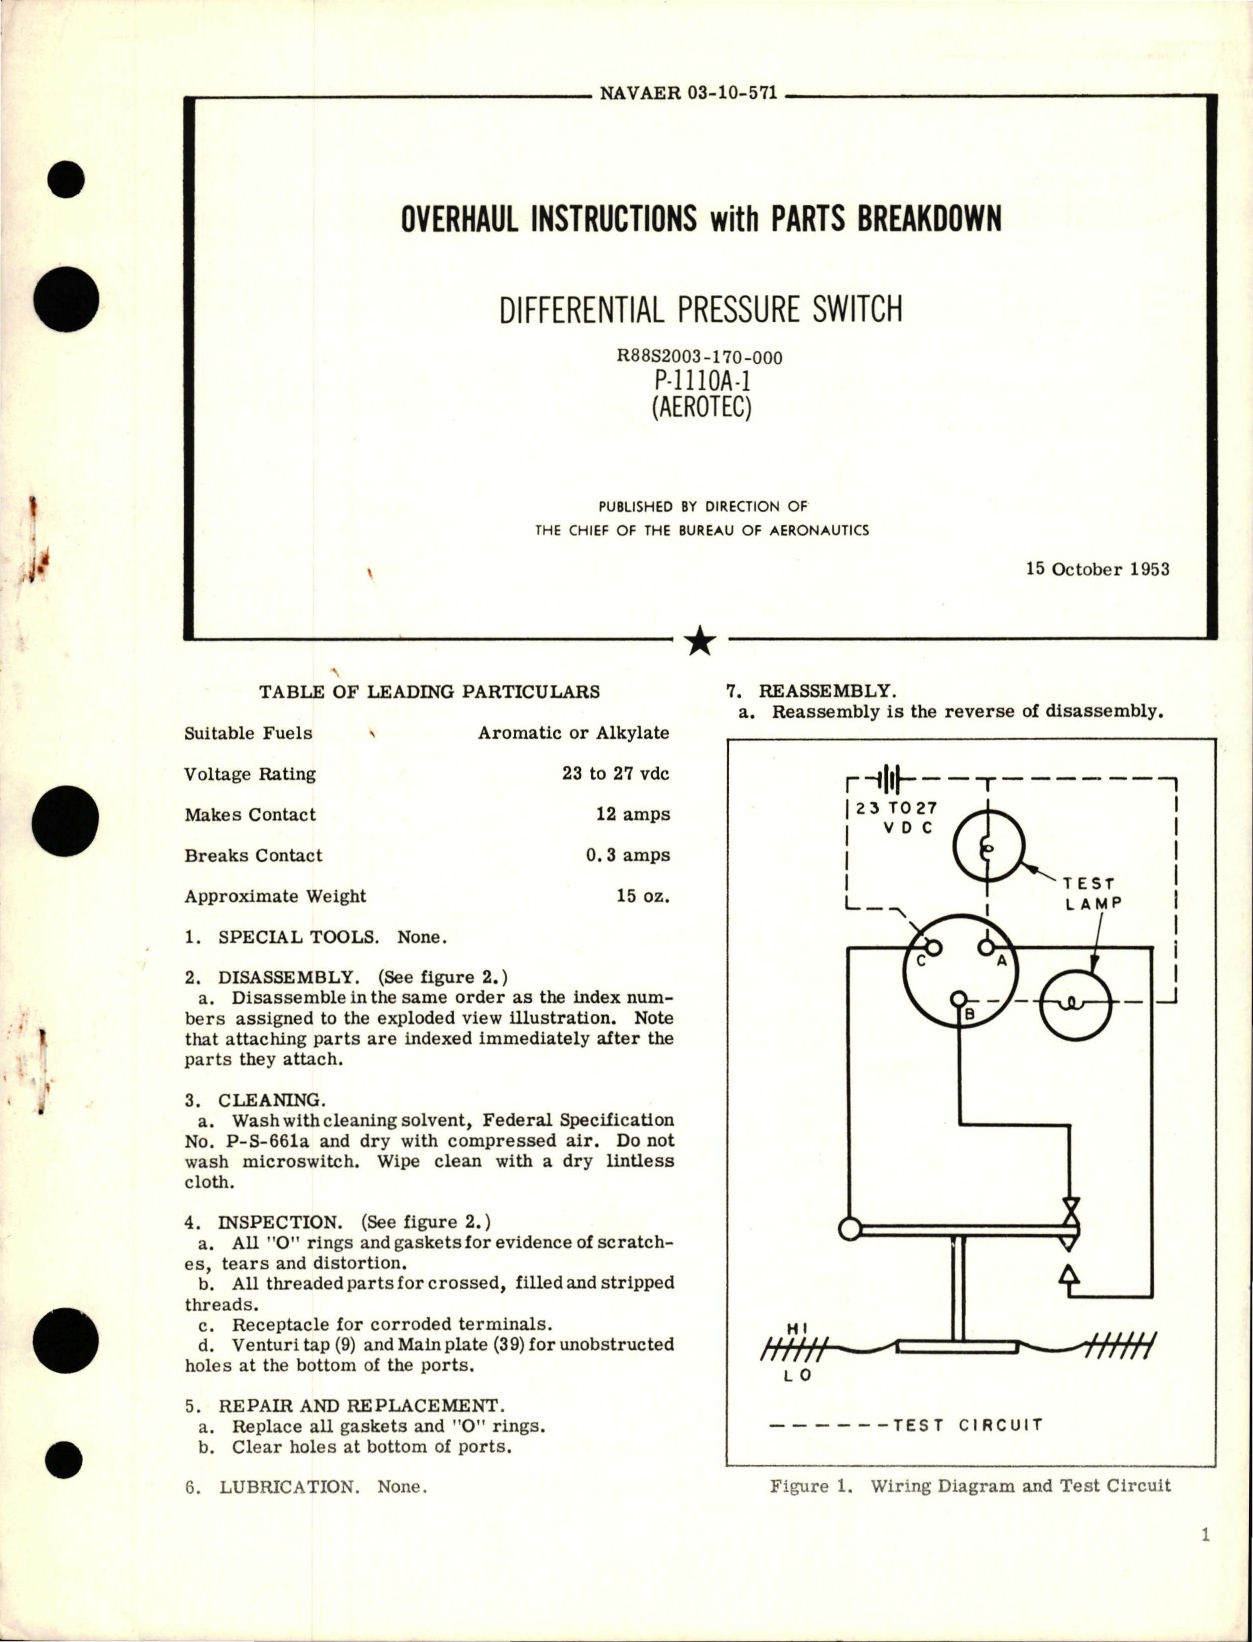 Sample page 1 from AirCorps Library document: Overhaul Instructions with Parts Breakdown for Differential Pressure Switch - P-1110A-1